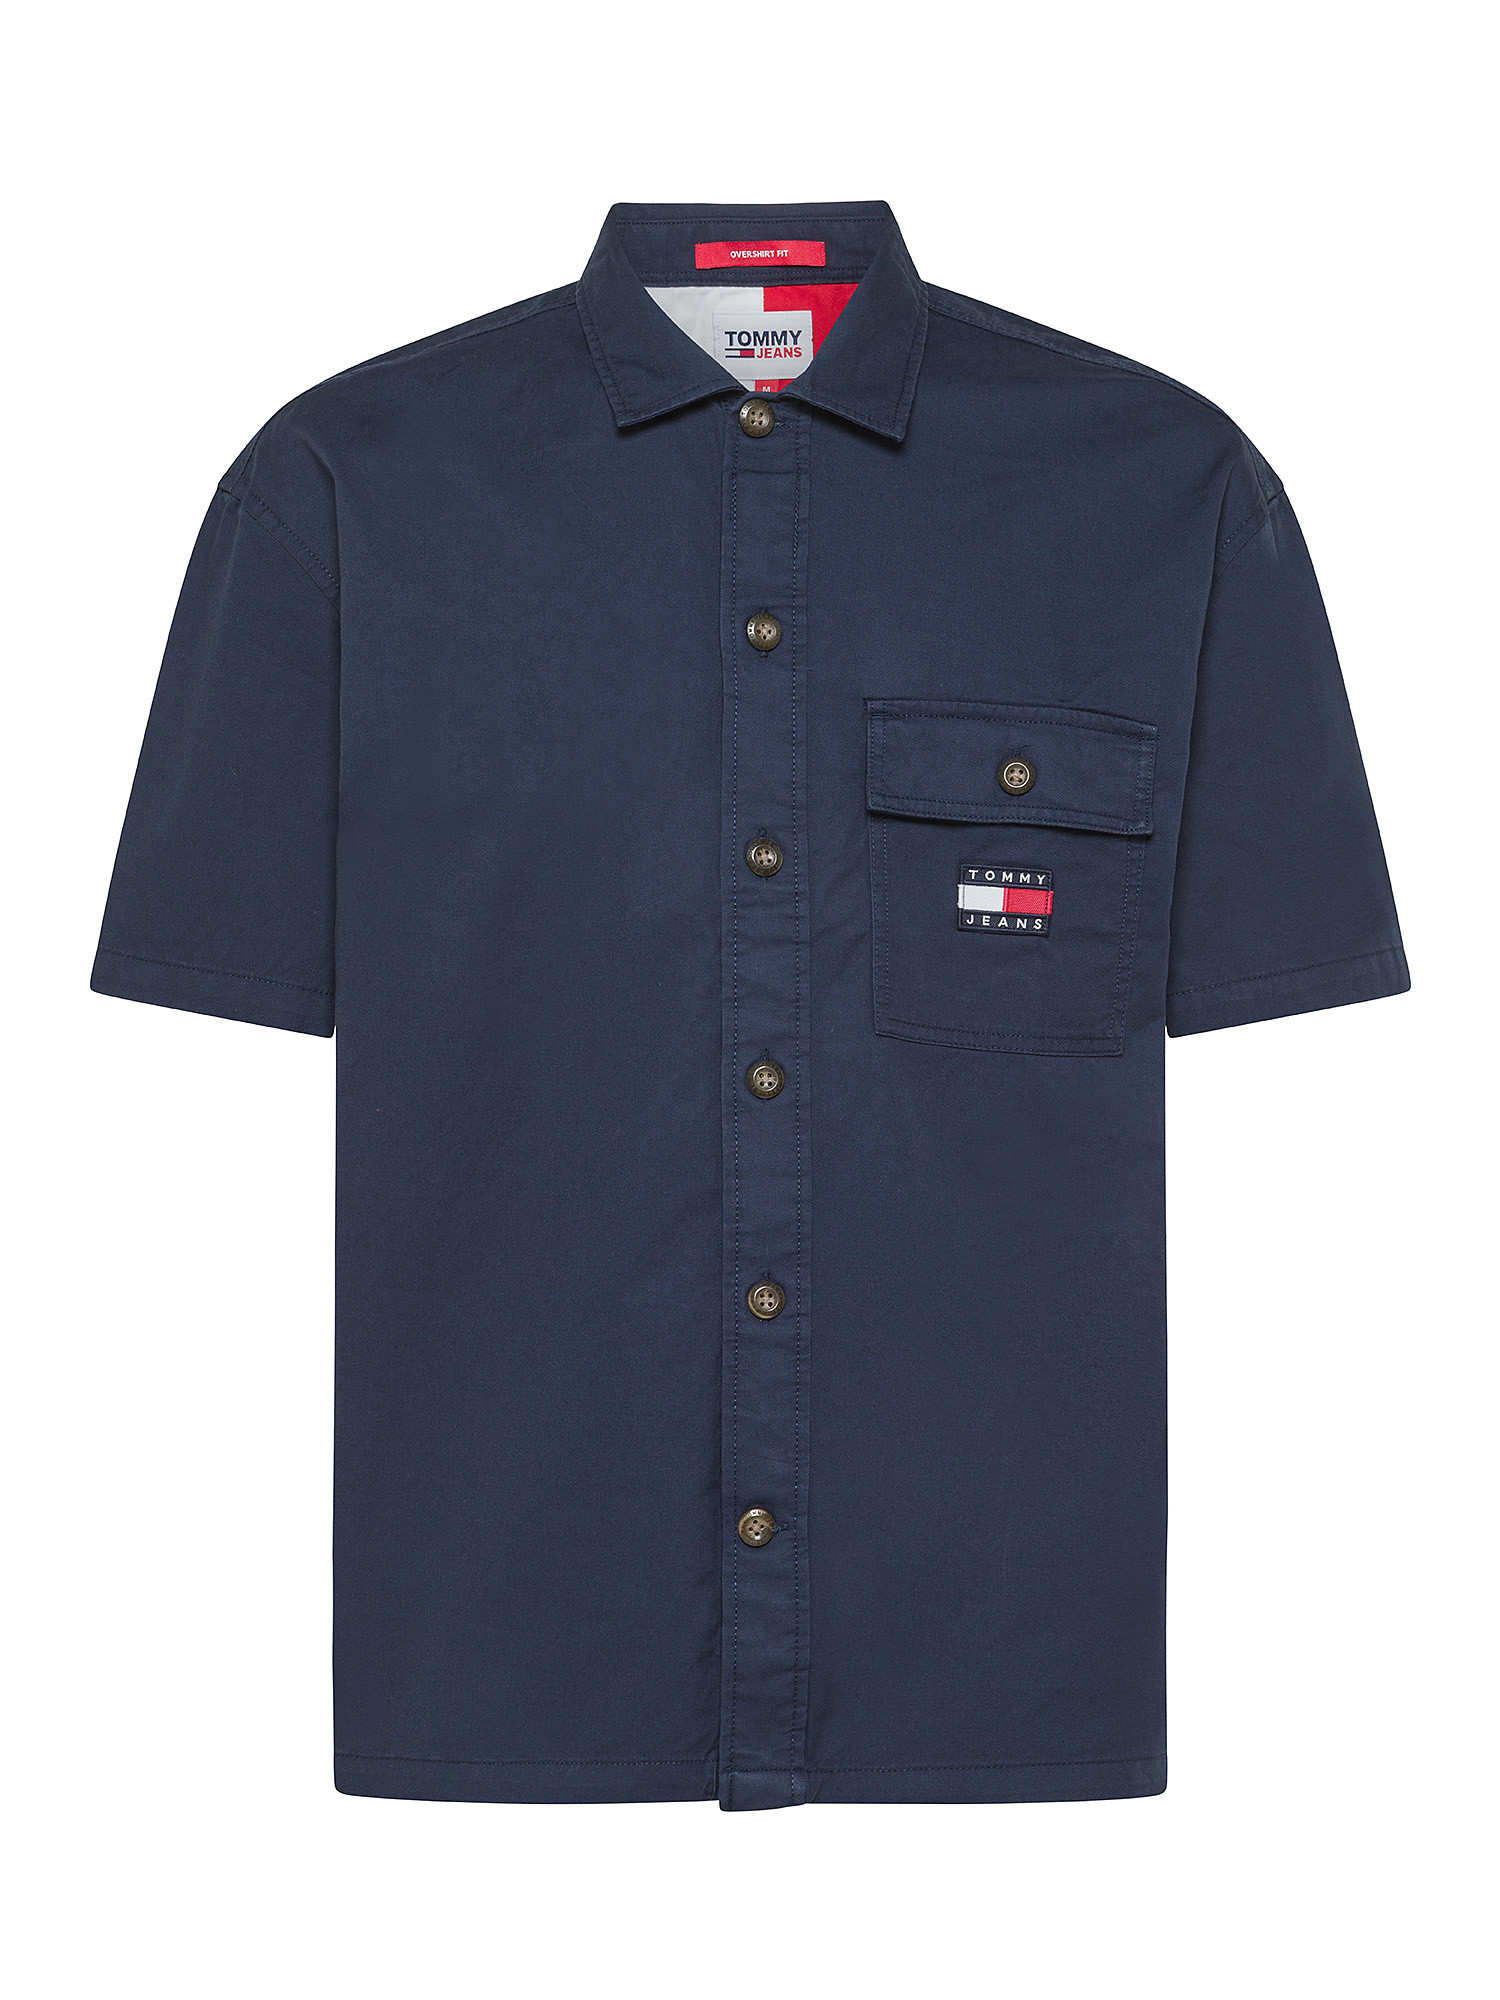 Tommy Jeans - Cotton shirt with logo, Dark Blue, large image number 0